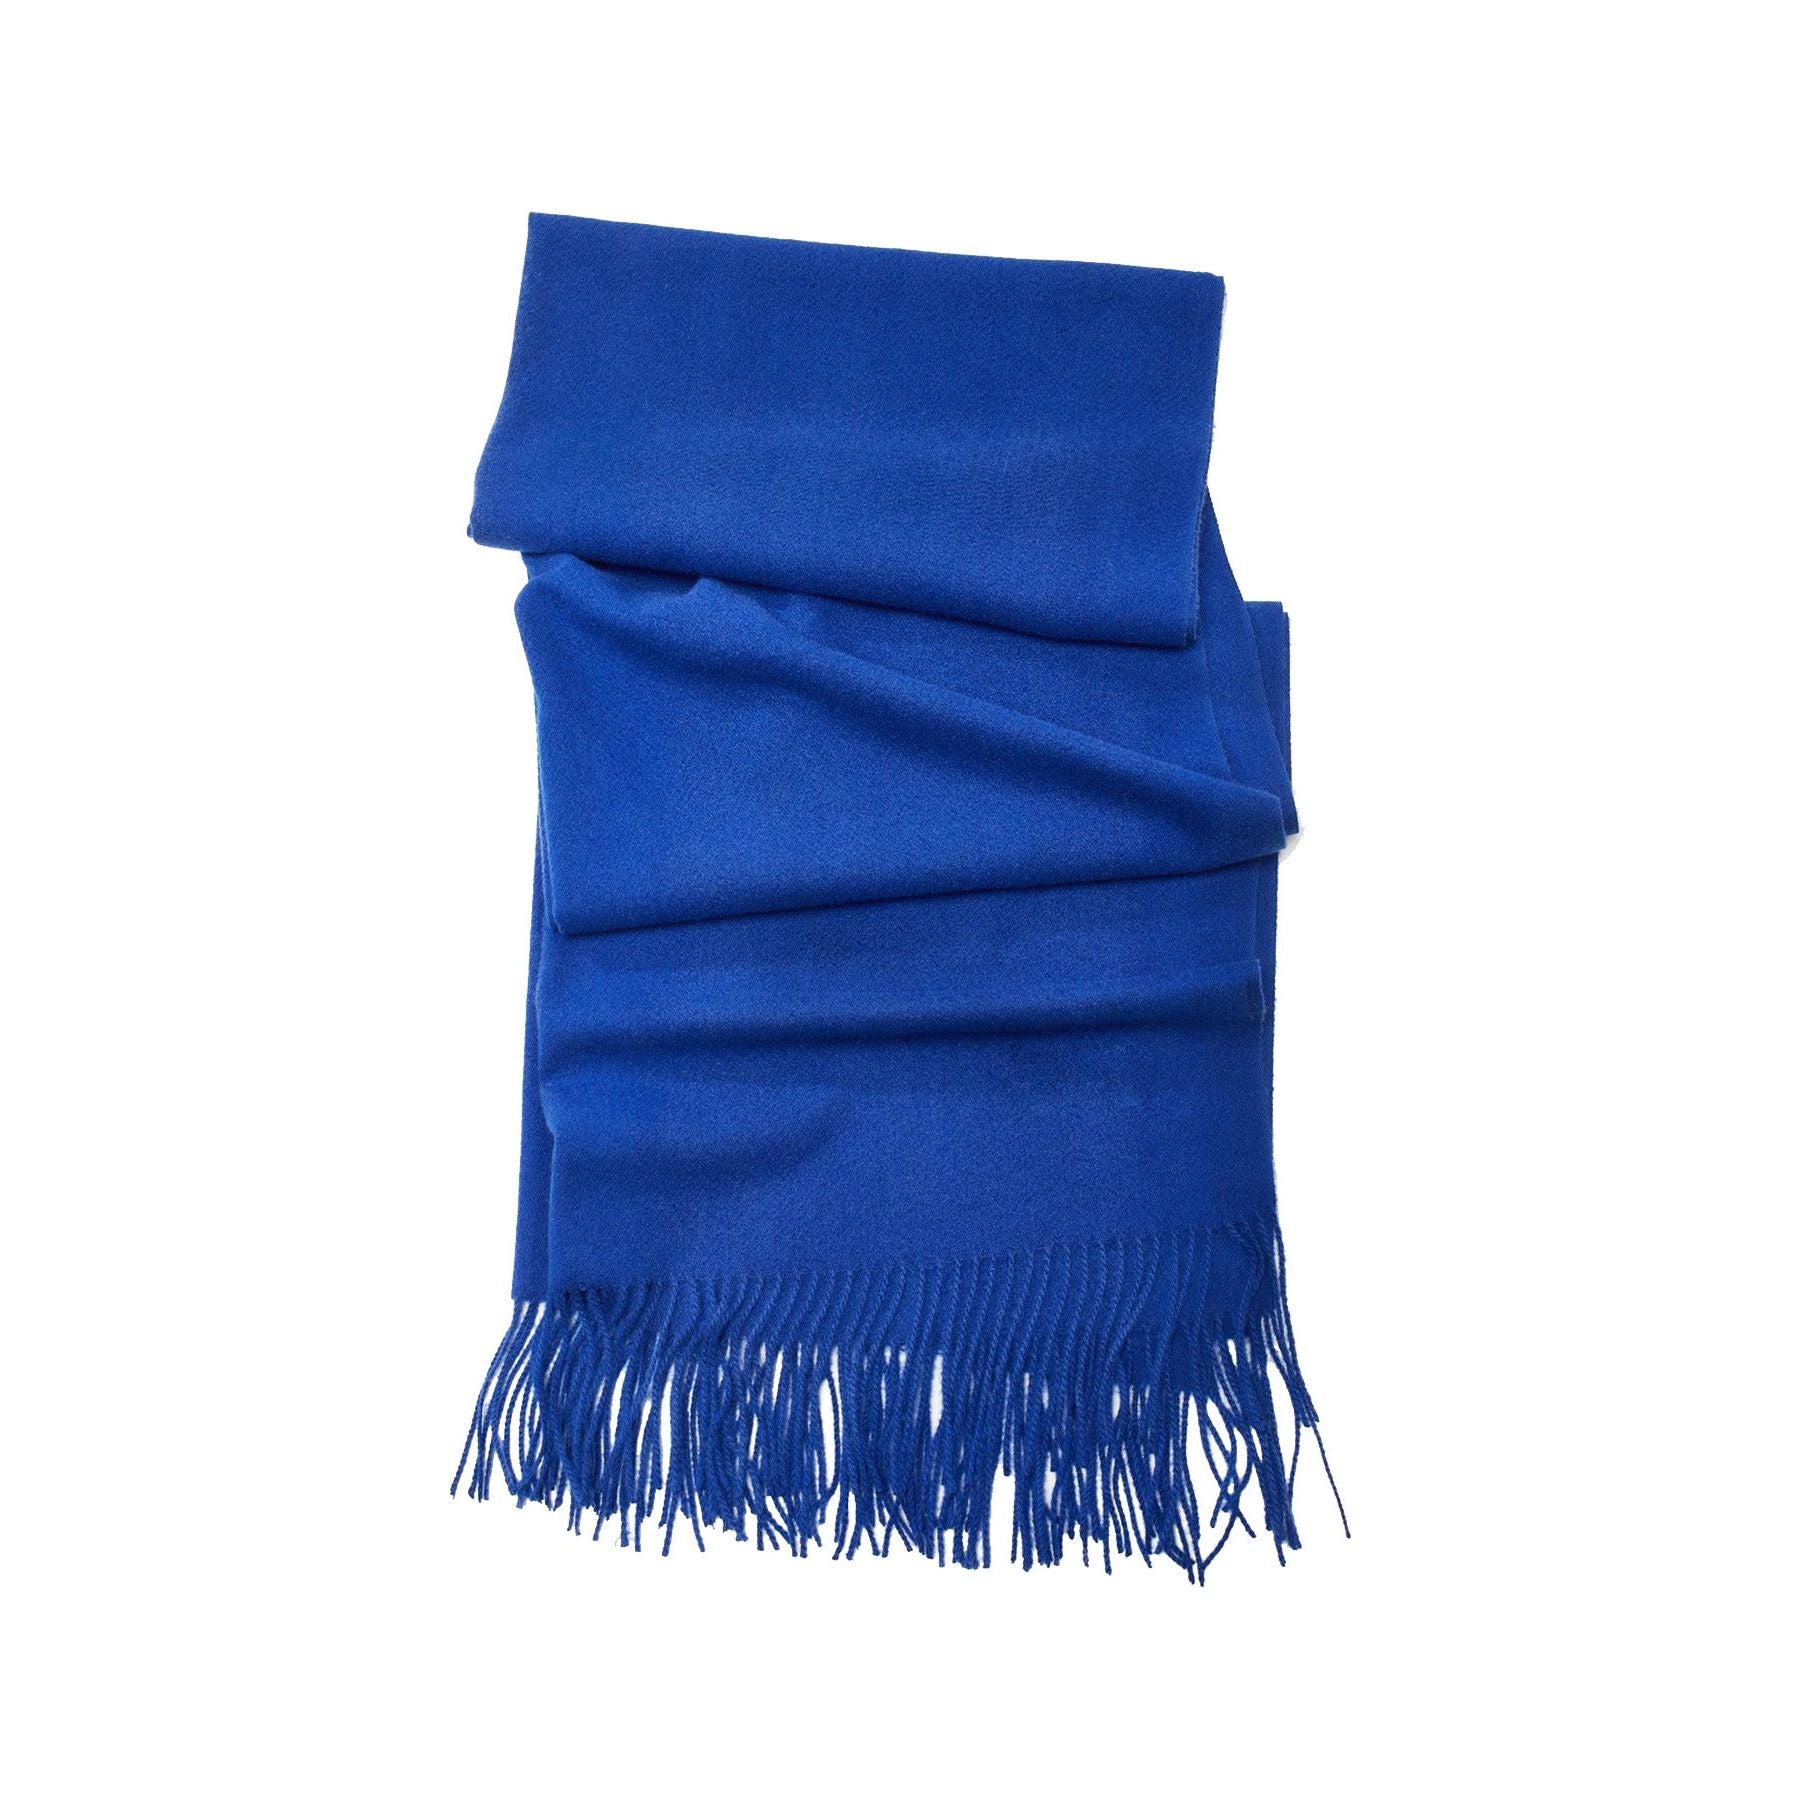 Look By M Scarves Soft Basic Scarf, Royal Blue